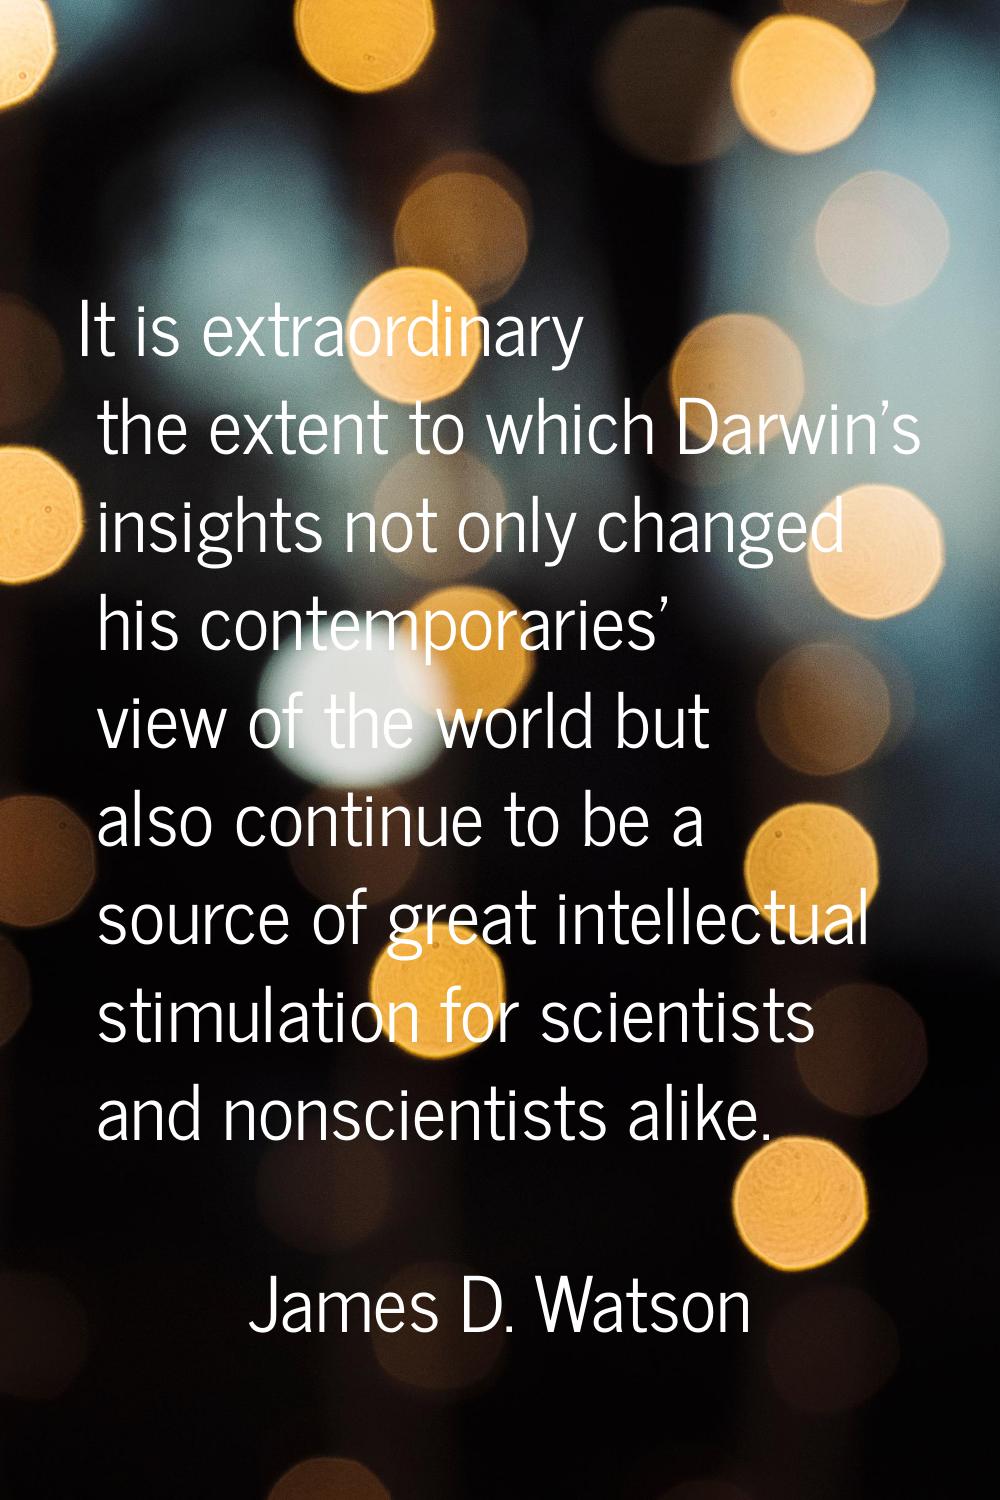 It is extraordinary the extent to which Darwin's insights not only changed his contemporaries' view